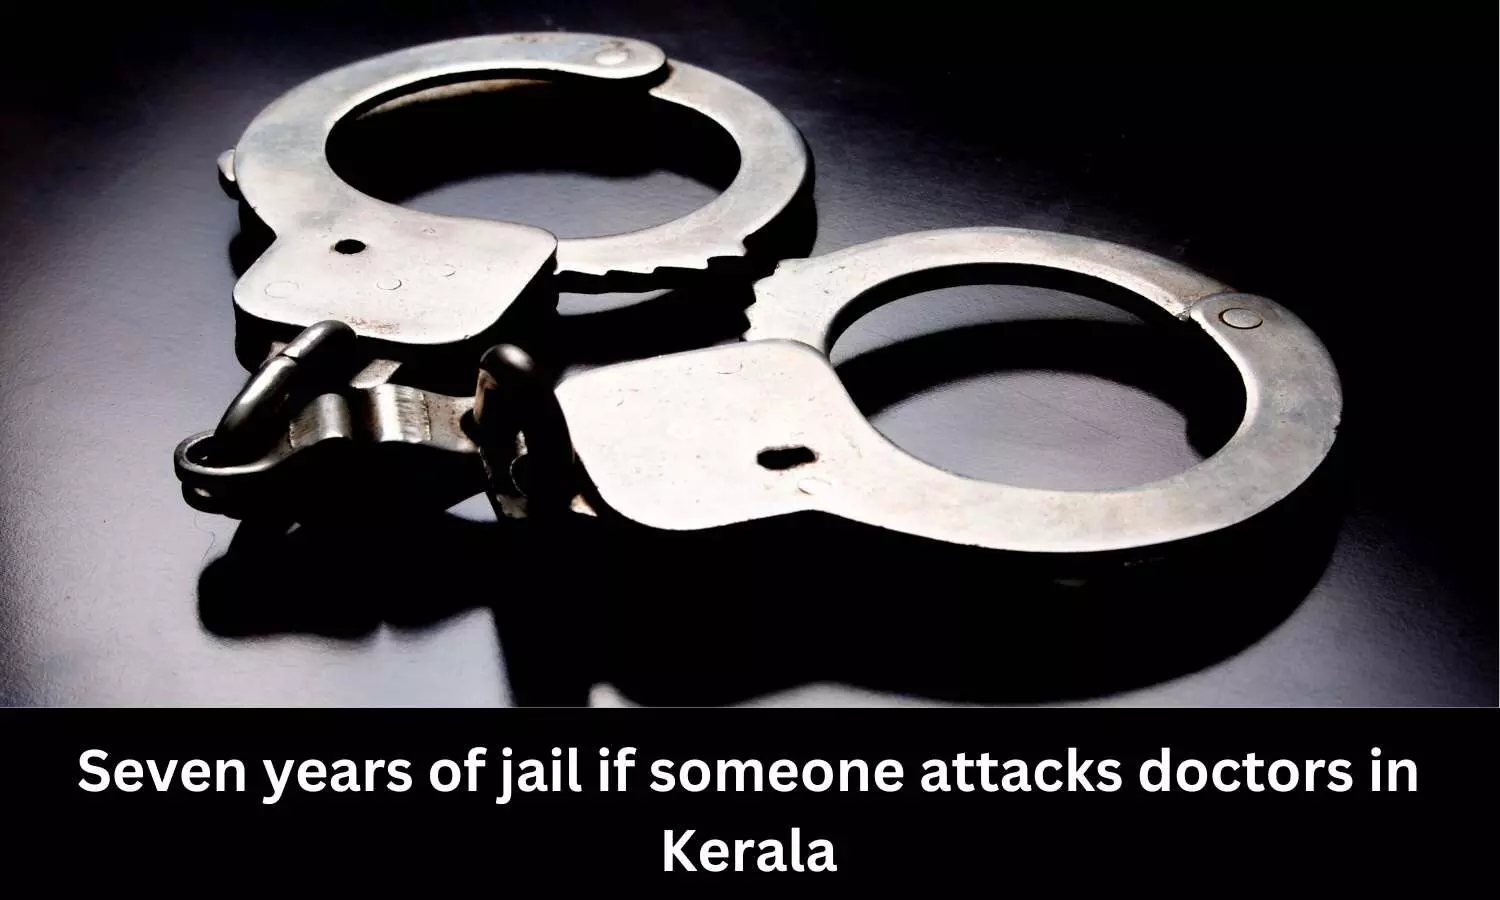 7 years of jail if someone attacks doctors in Kerala